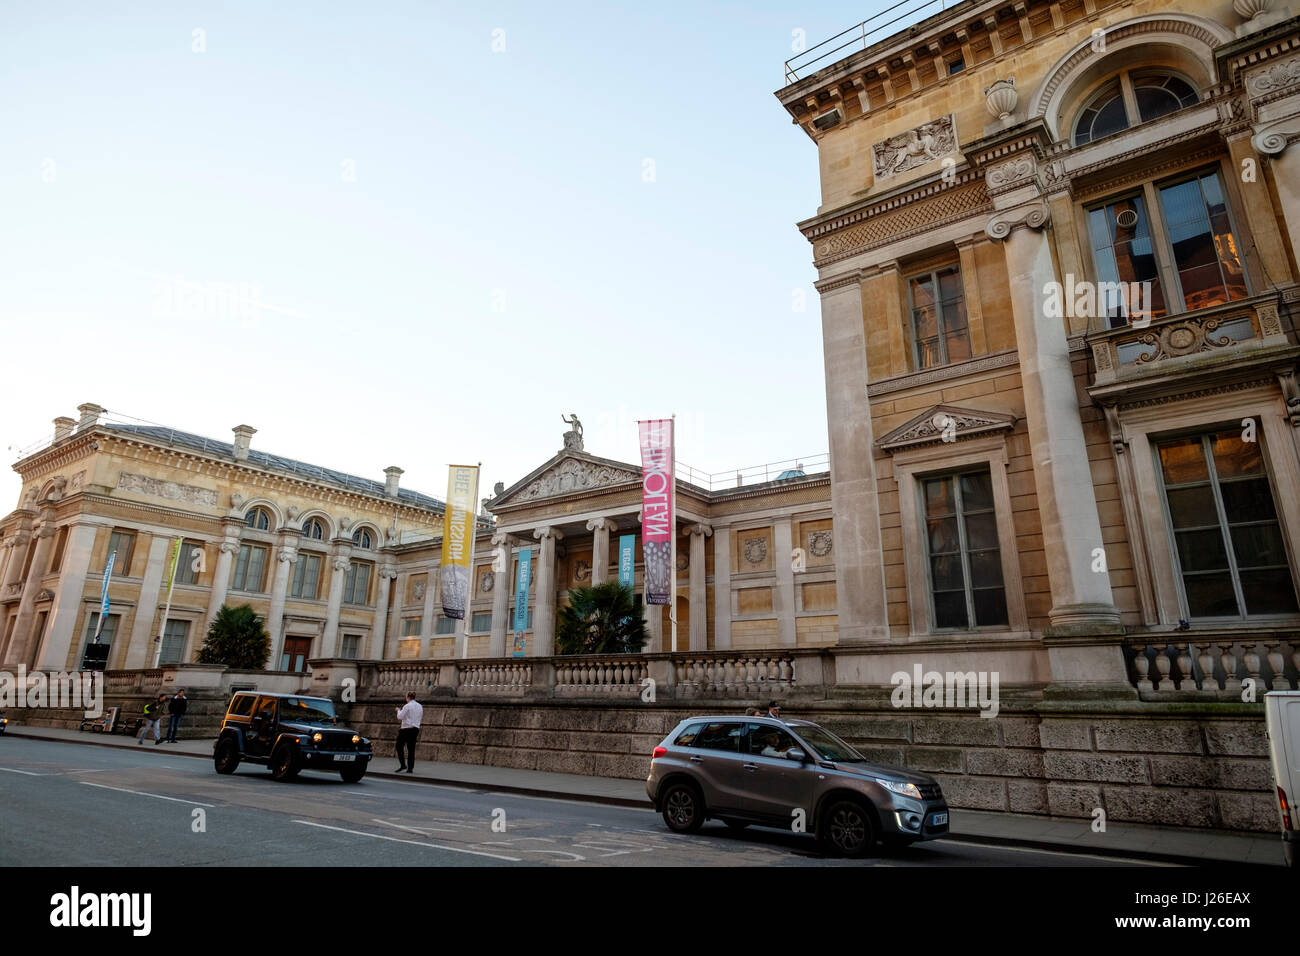 Ashmolean Museum of Art and Archaeology in Oxford, Oxfordshire, England, United Kingdom Stock Photo